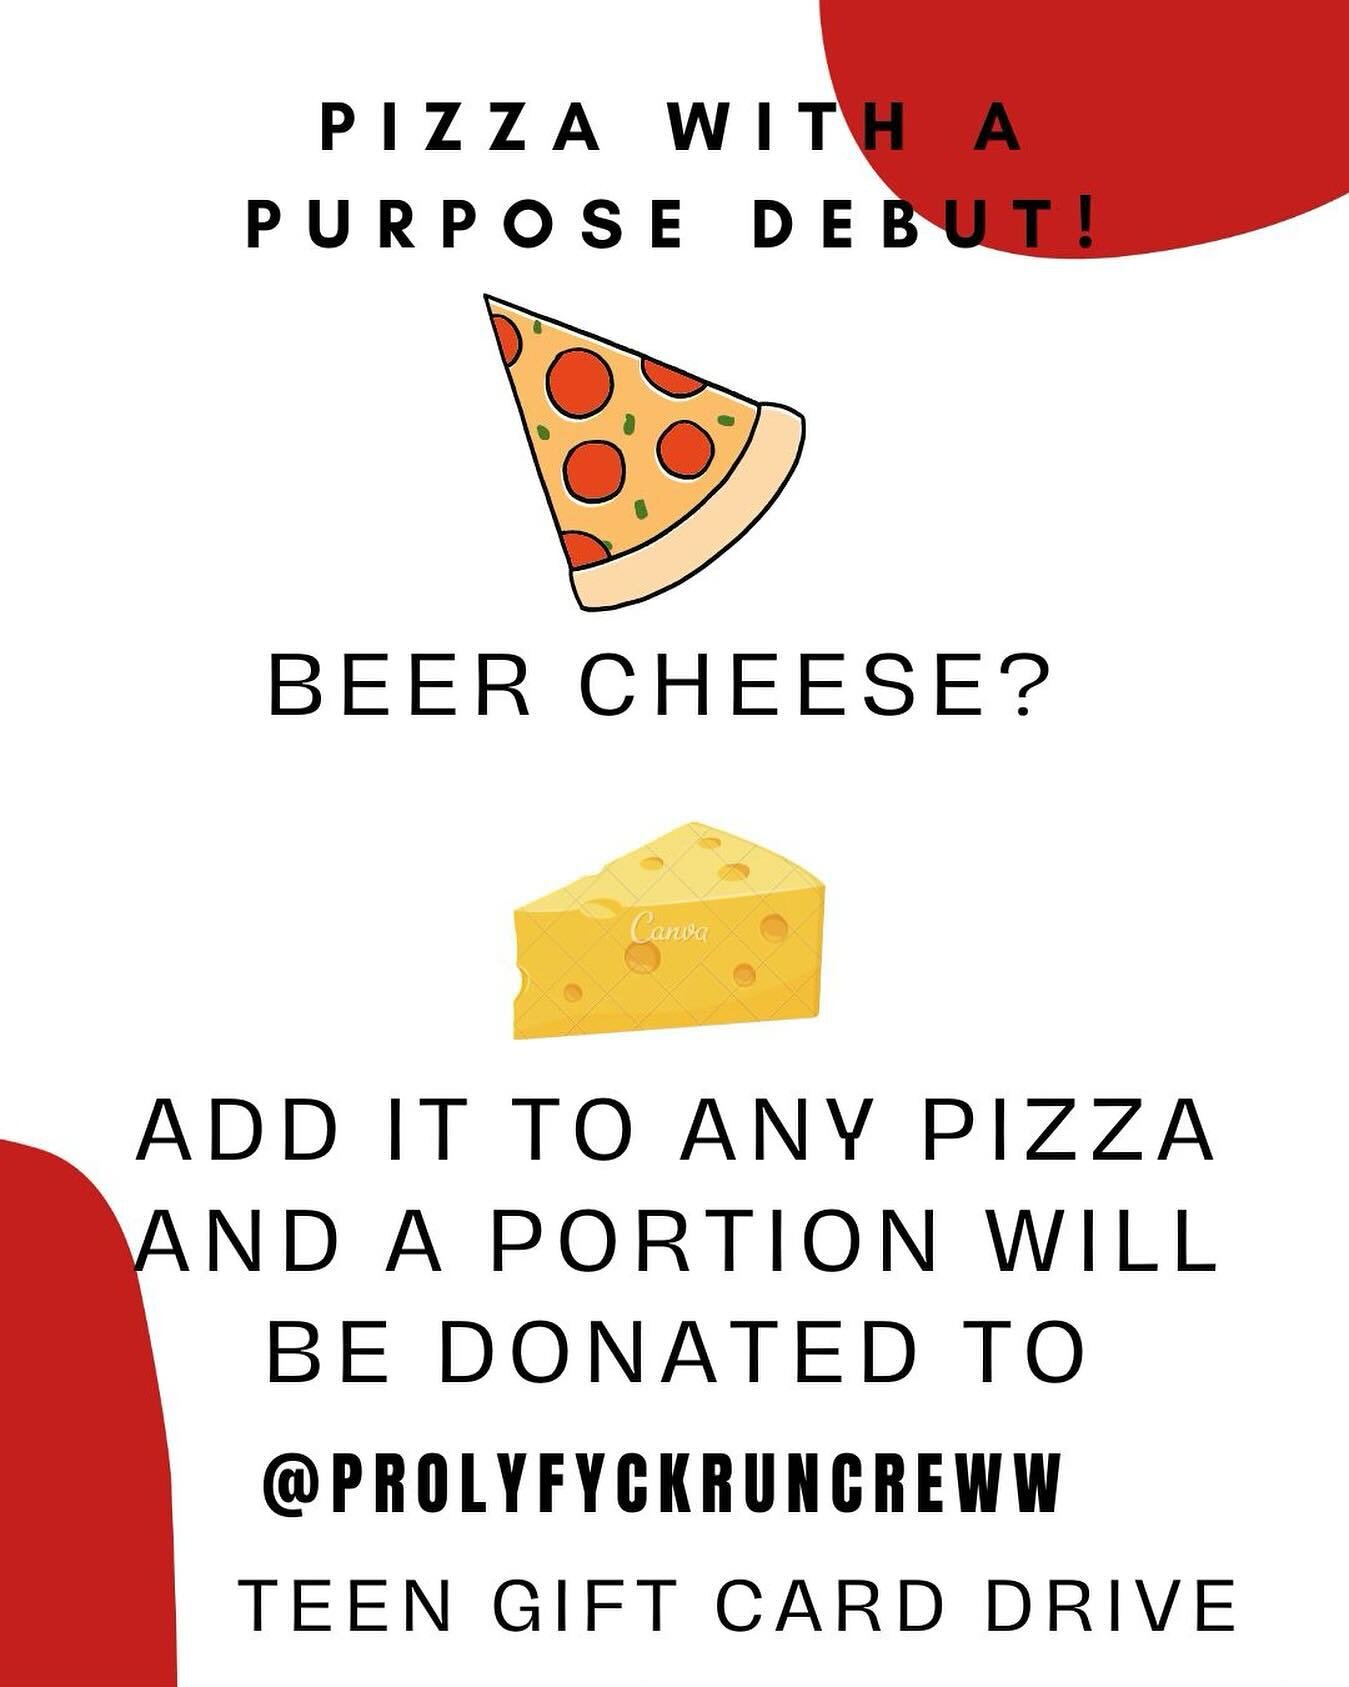 Beer cheese! 
.
.
Make your pizza extra cheesy this weekend! If you do, a portion will be donated to @prolyfyckruncreww teen drive! Check out their IG to learn more about their awesome group. Our delicious beer cheese can be added to any of our pizza